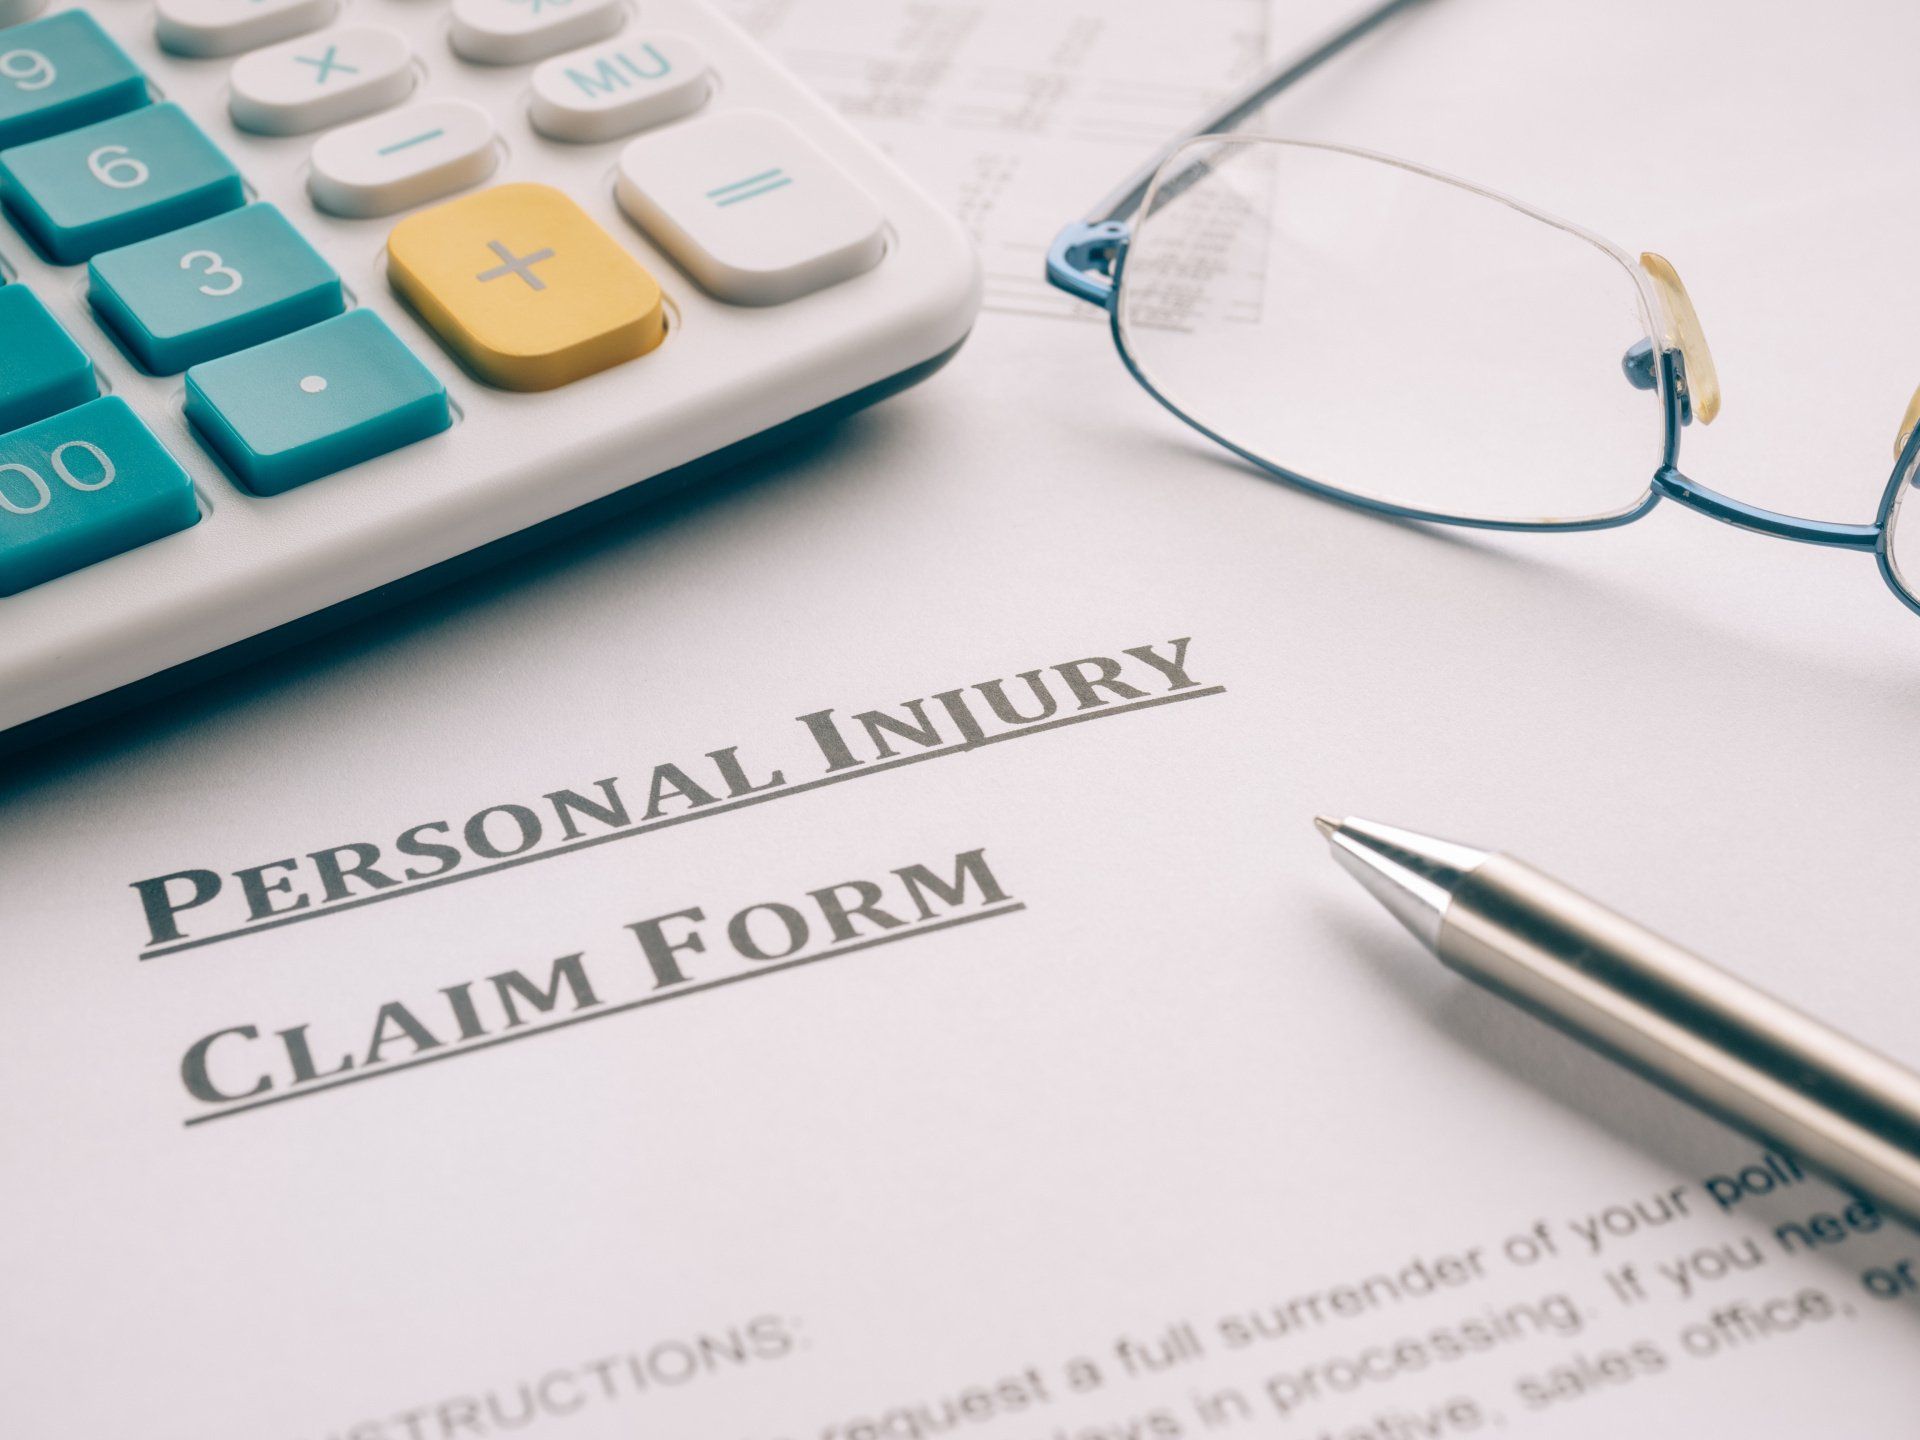 What Are The Steps For Filing a Personal Injury Claim?